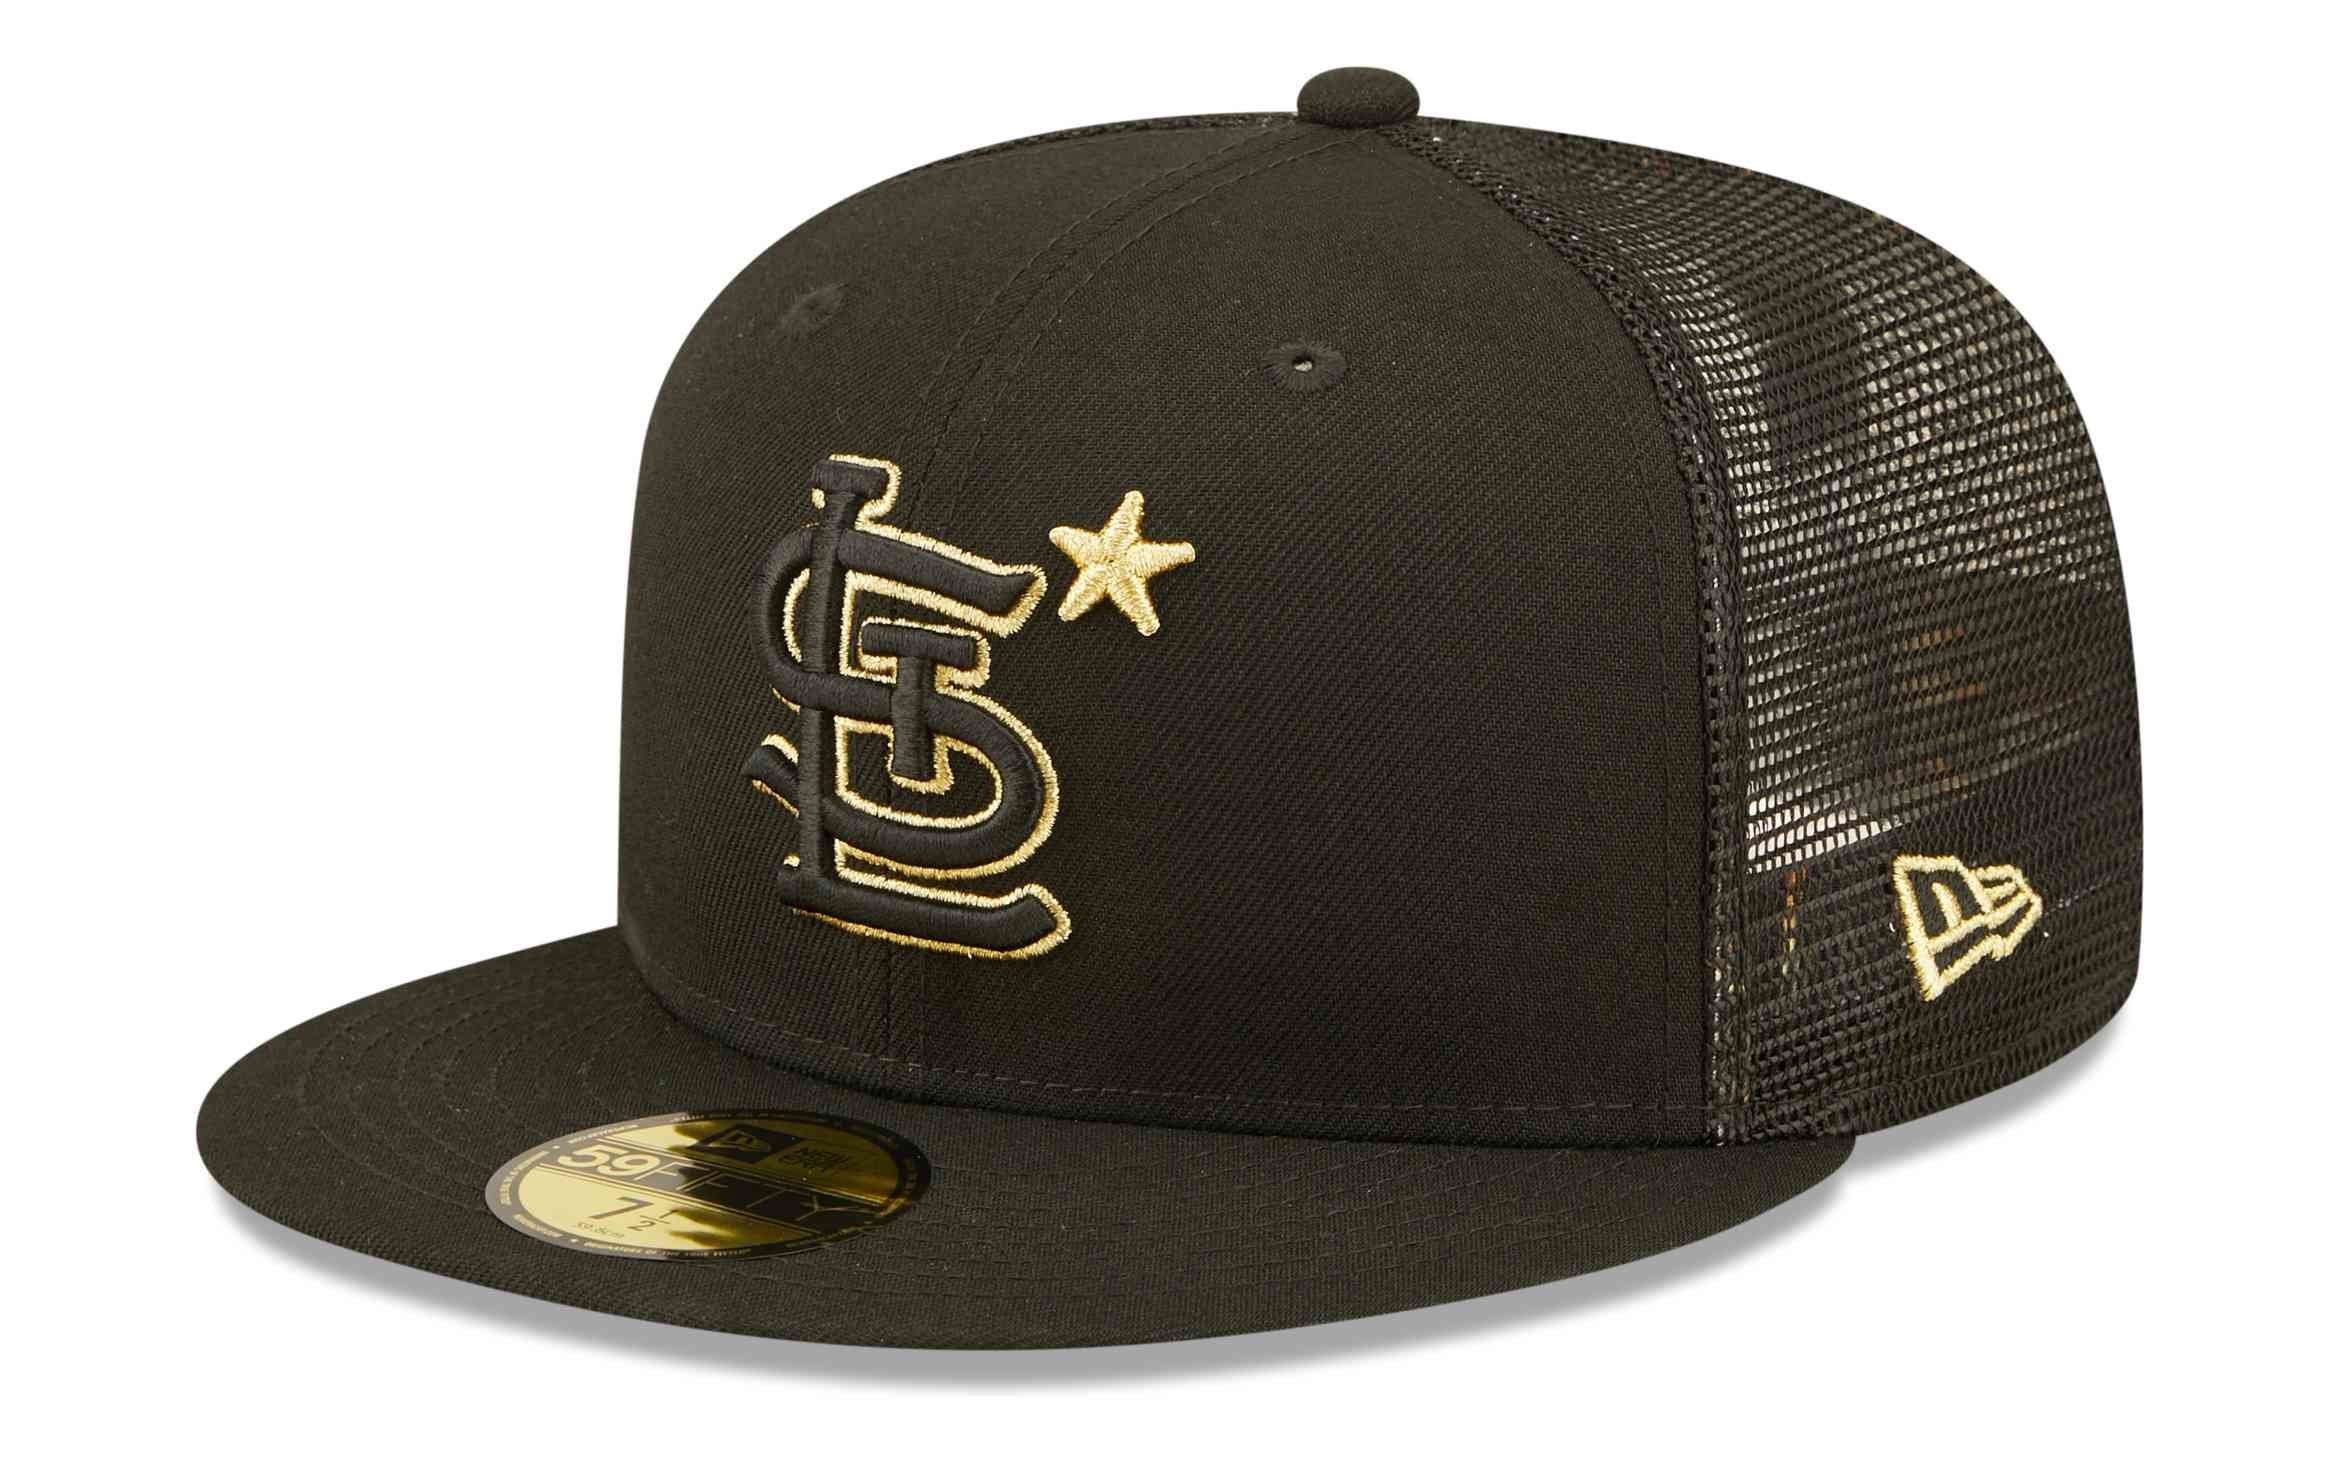 New Era Fitted Cap MLB St. Louis Cardinals All Star Game 59Fifty